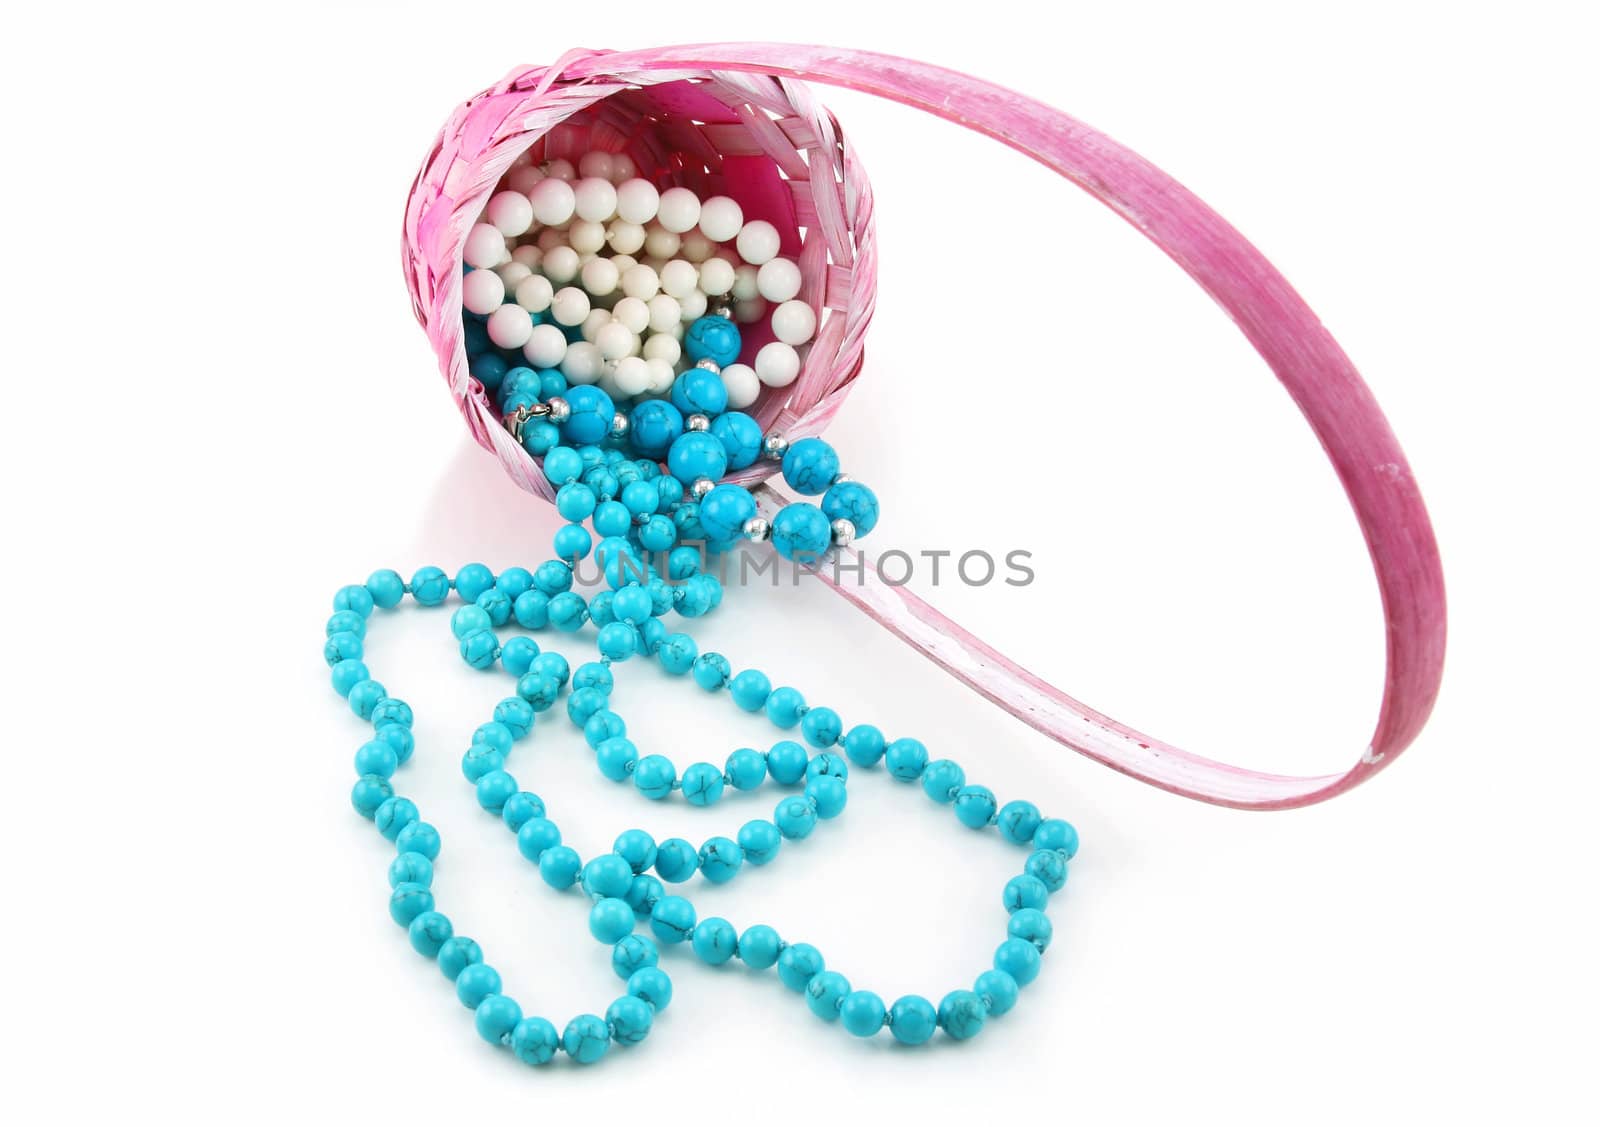 Colored Pearl Beads in Pink Wicker Basket Isolated by alphacell